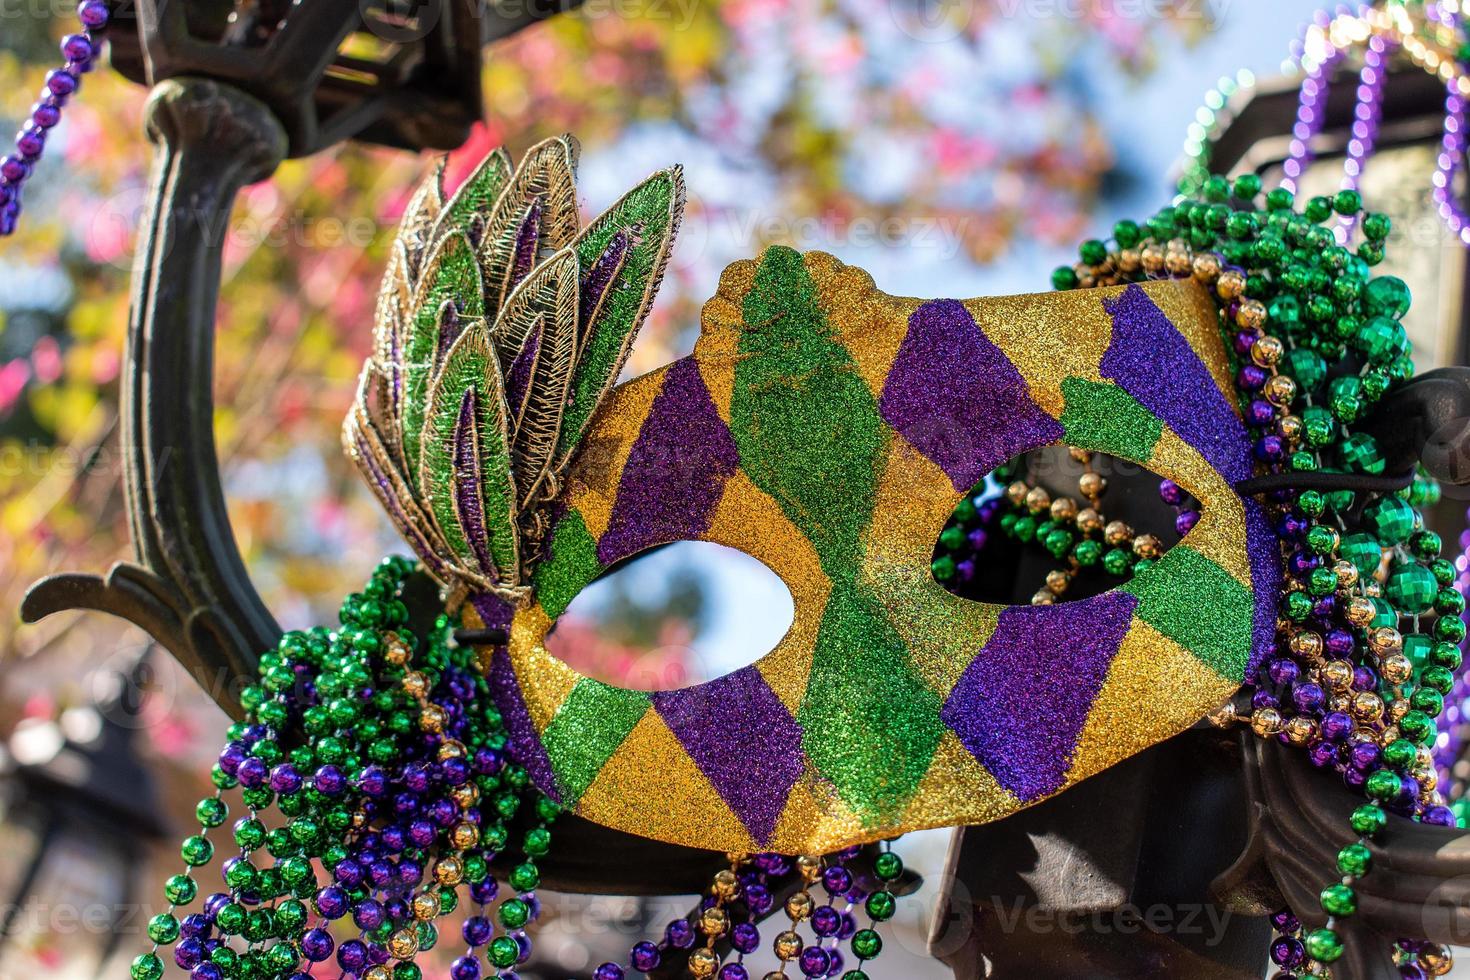 Outdoor Mardi Gras beads and mask on light post in sunshine photo